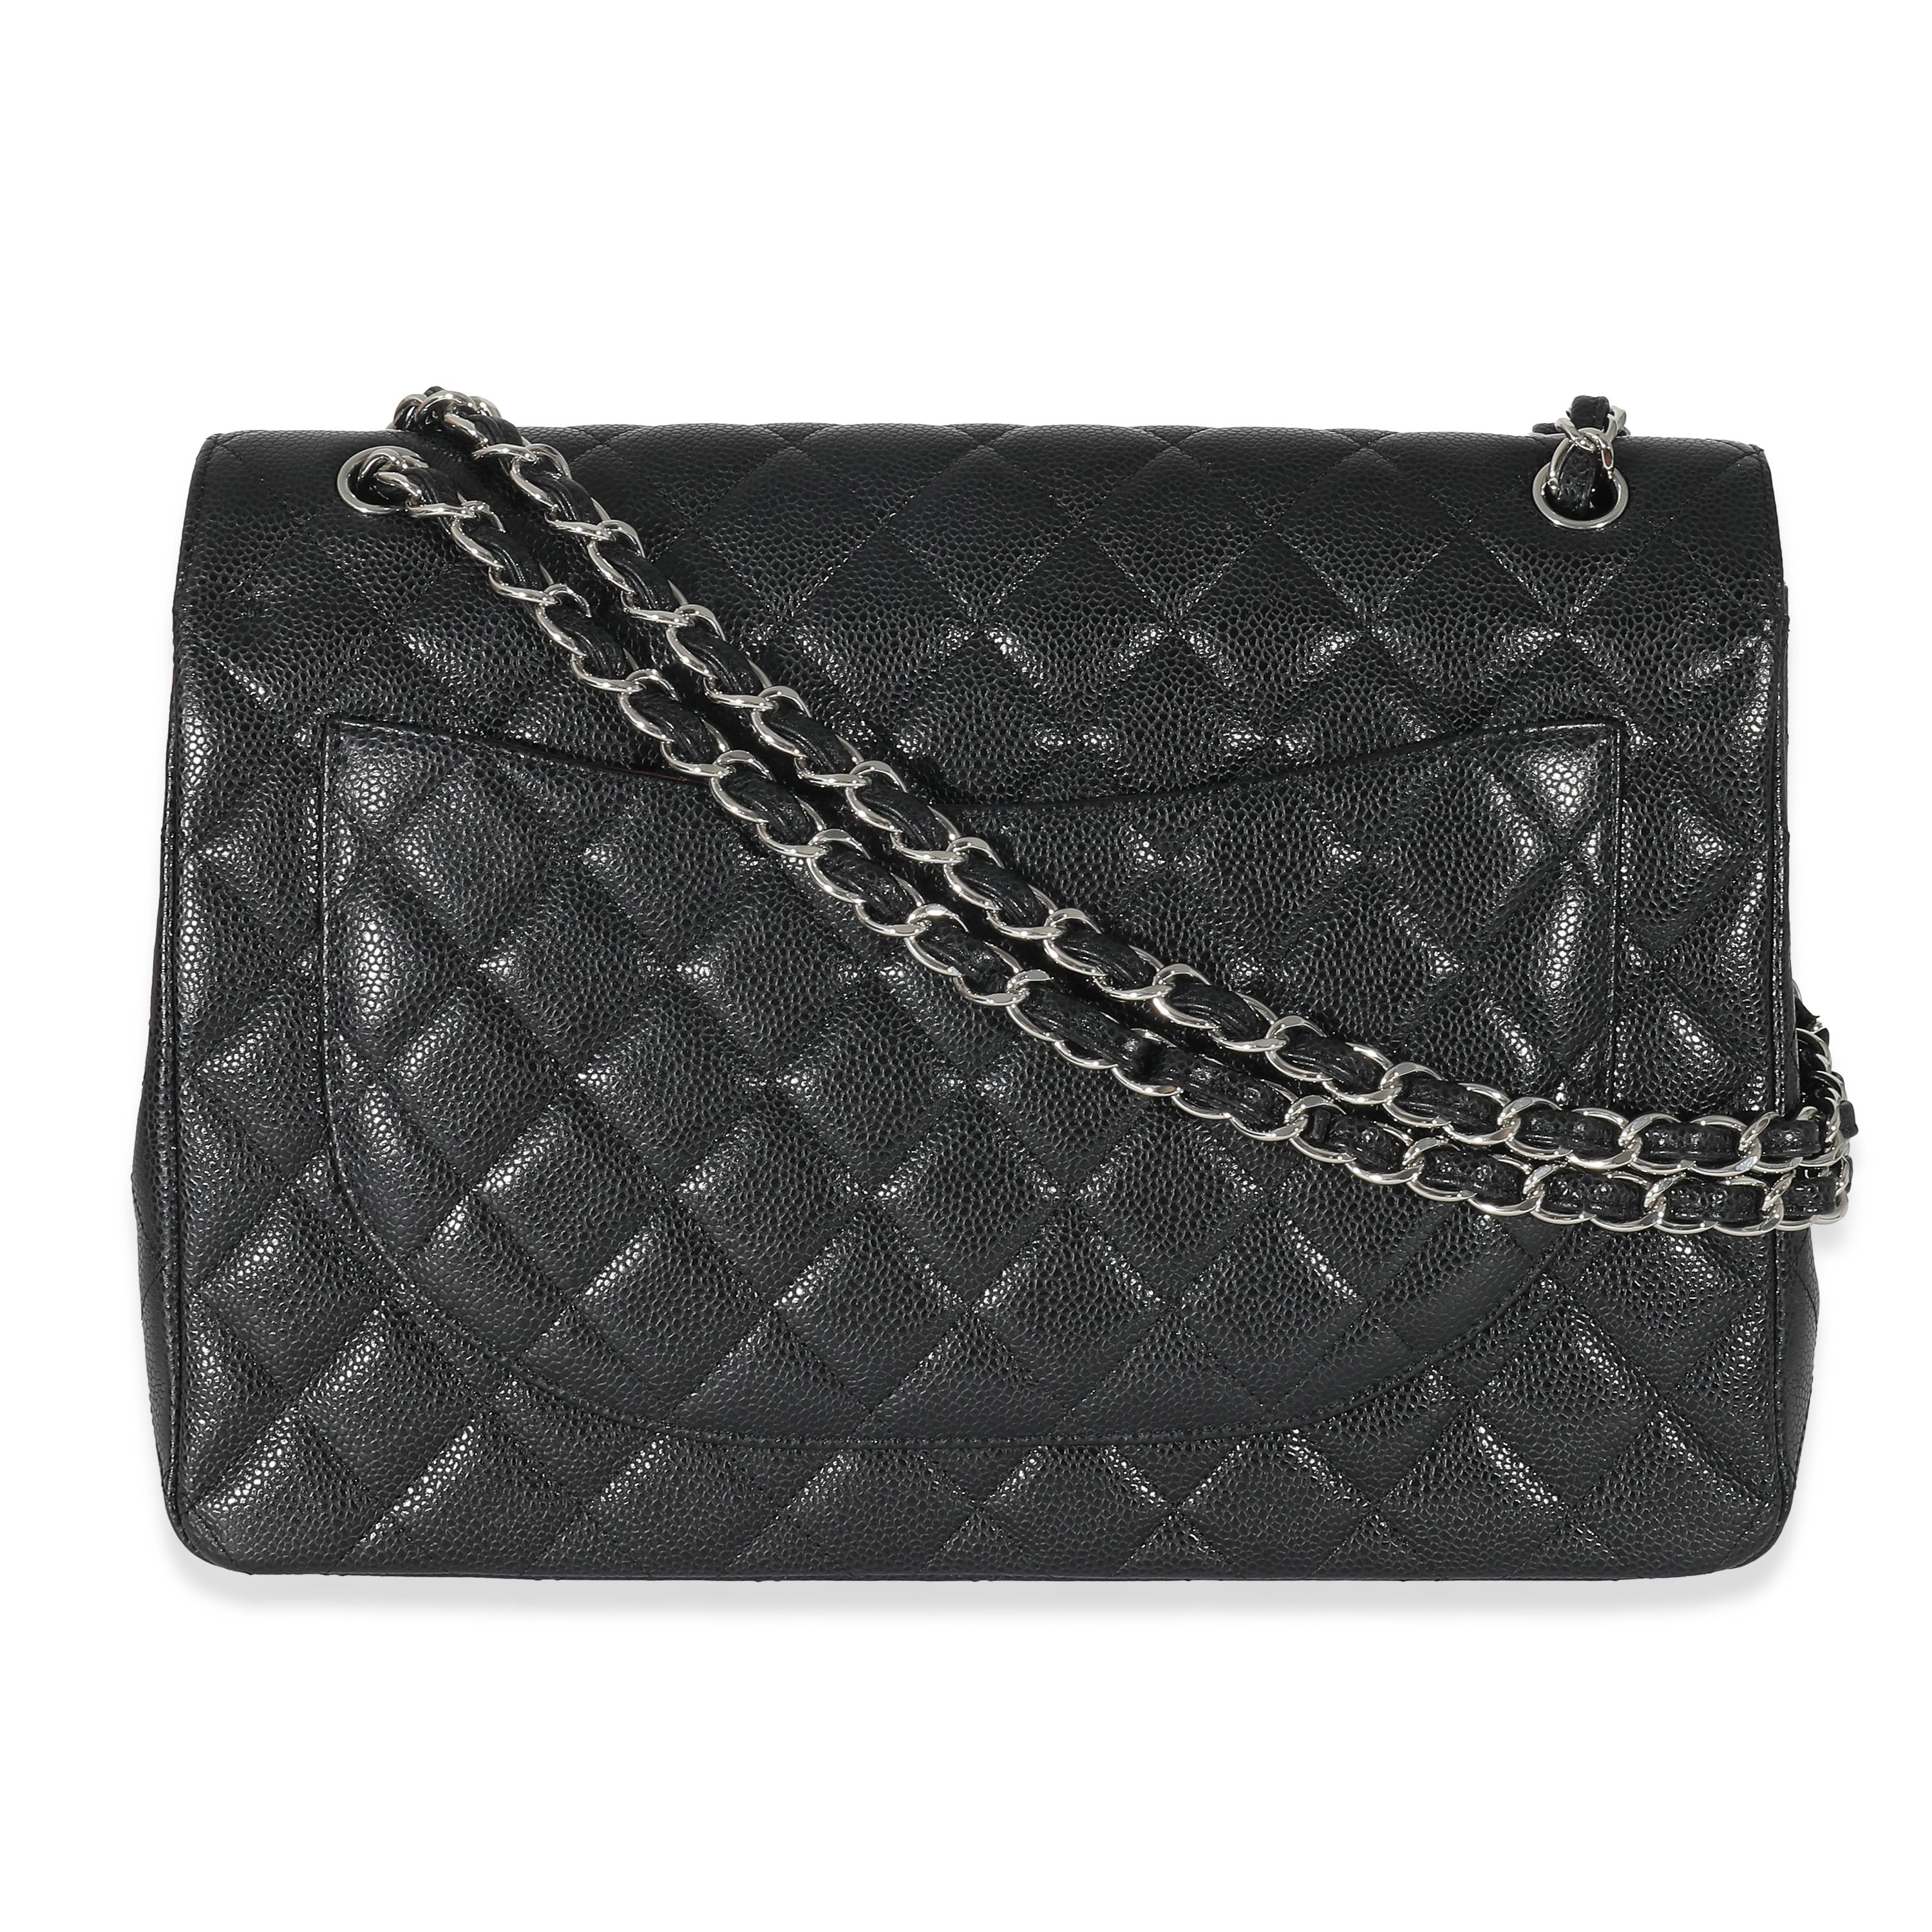 Chanel Black Quilted Caviar Maxi Double Flap Bag In Excellent Condition For Sale In New York, NY